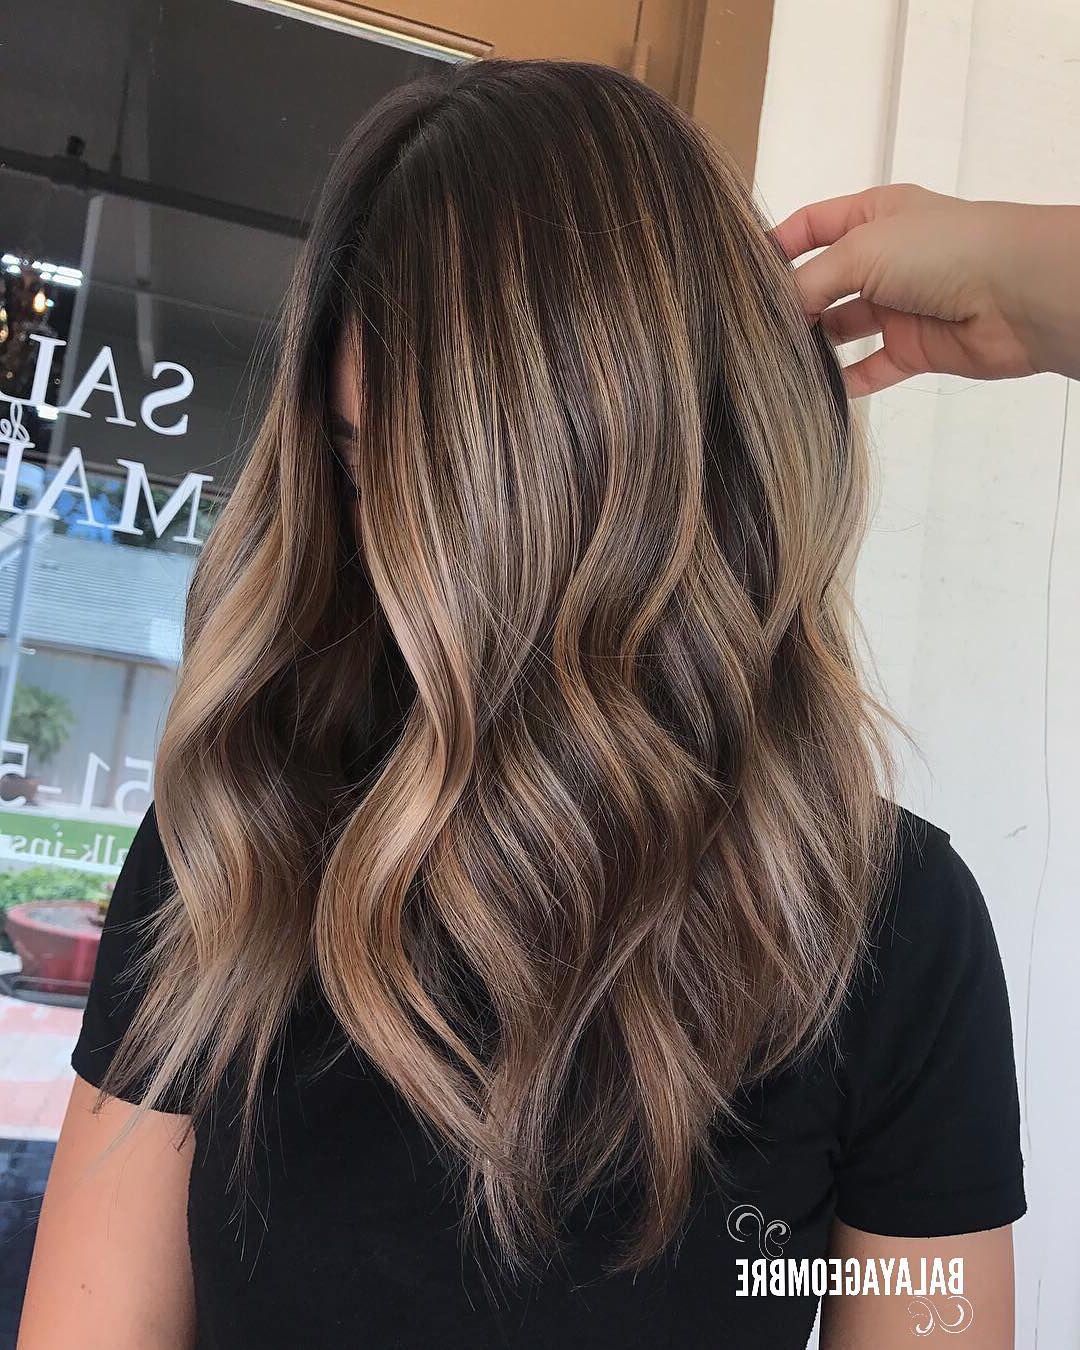 Most Recently Released Medium Haircuts In Layers Regarding 10 Best Medium Layered Hairstyles 2019 – Brown & Ash Blonde Fashion (View 6 of 20)